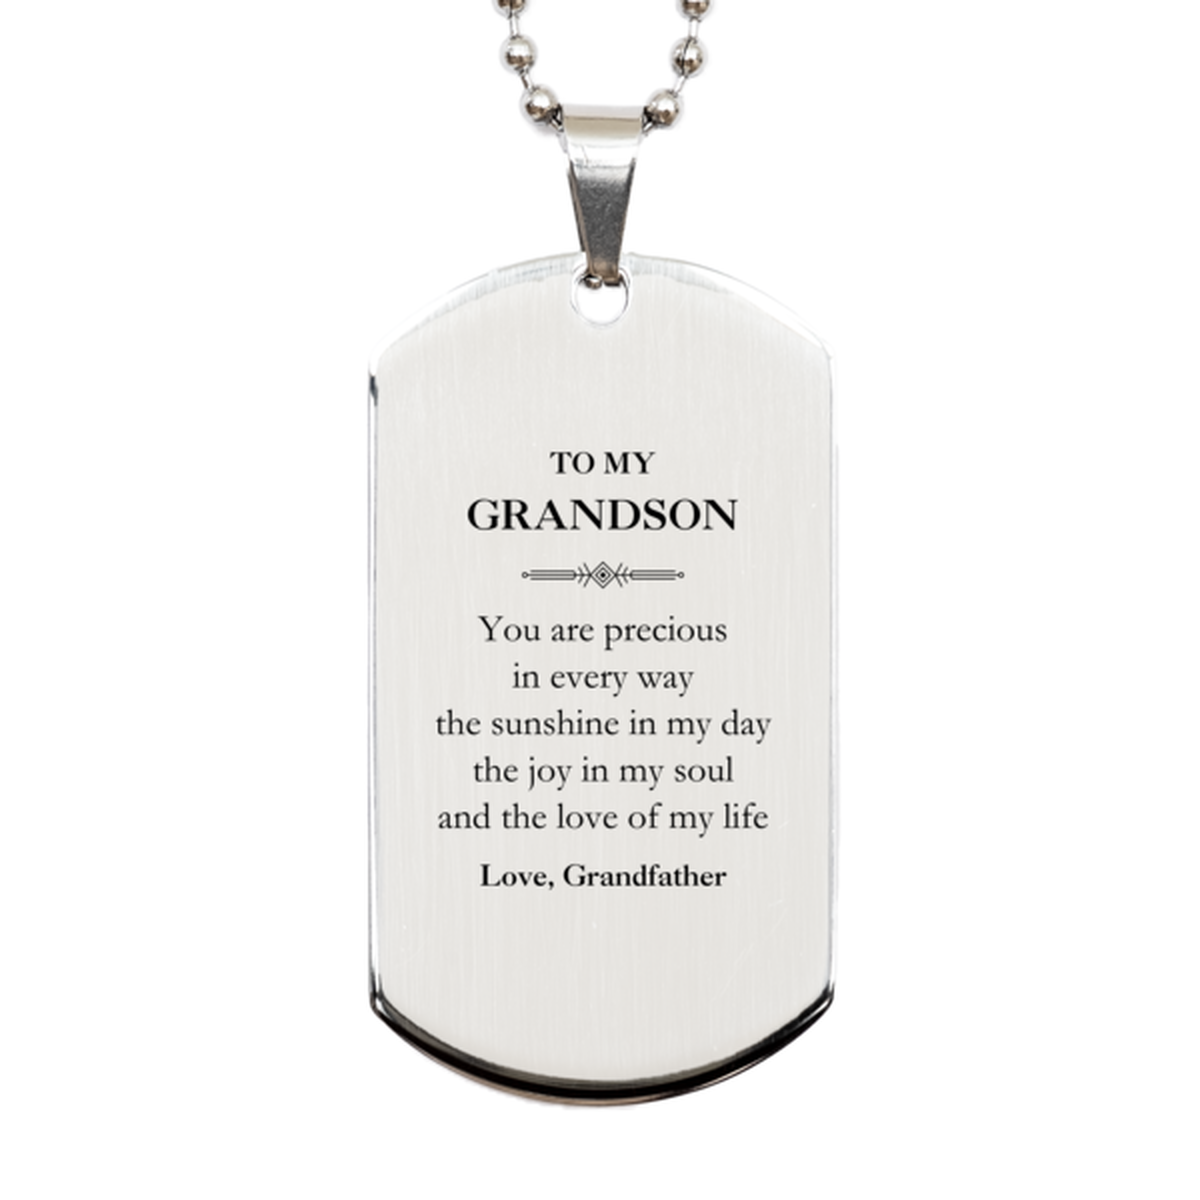 Graduation Gifts for Grandson Silver Dog Tag Present from Grandfather, Christmas Grandson Birthday Gifts Grandson You are precious in every way the sunshine in my day. Love, Grandfather